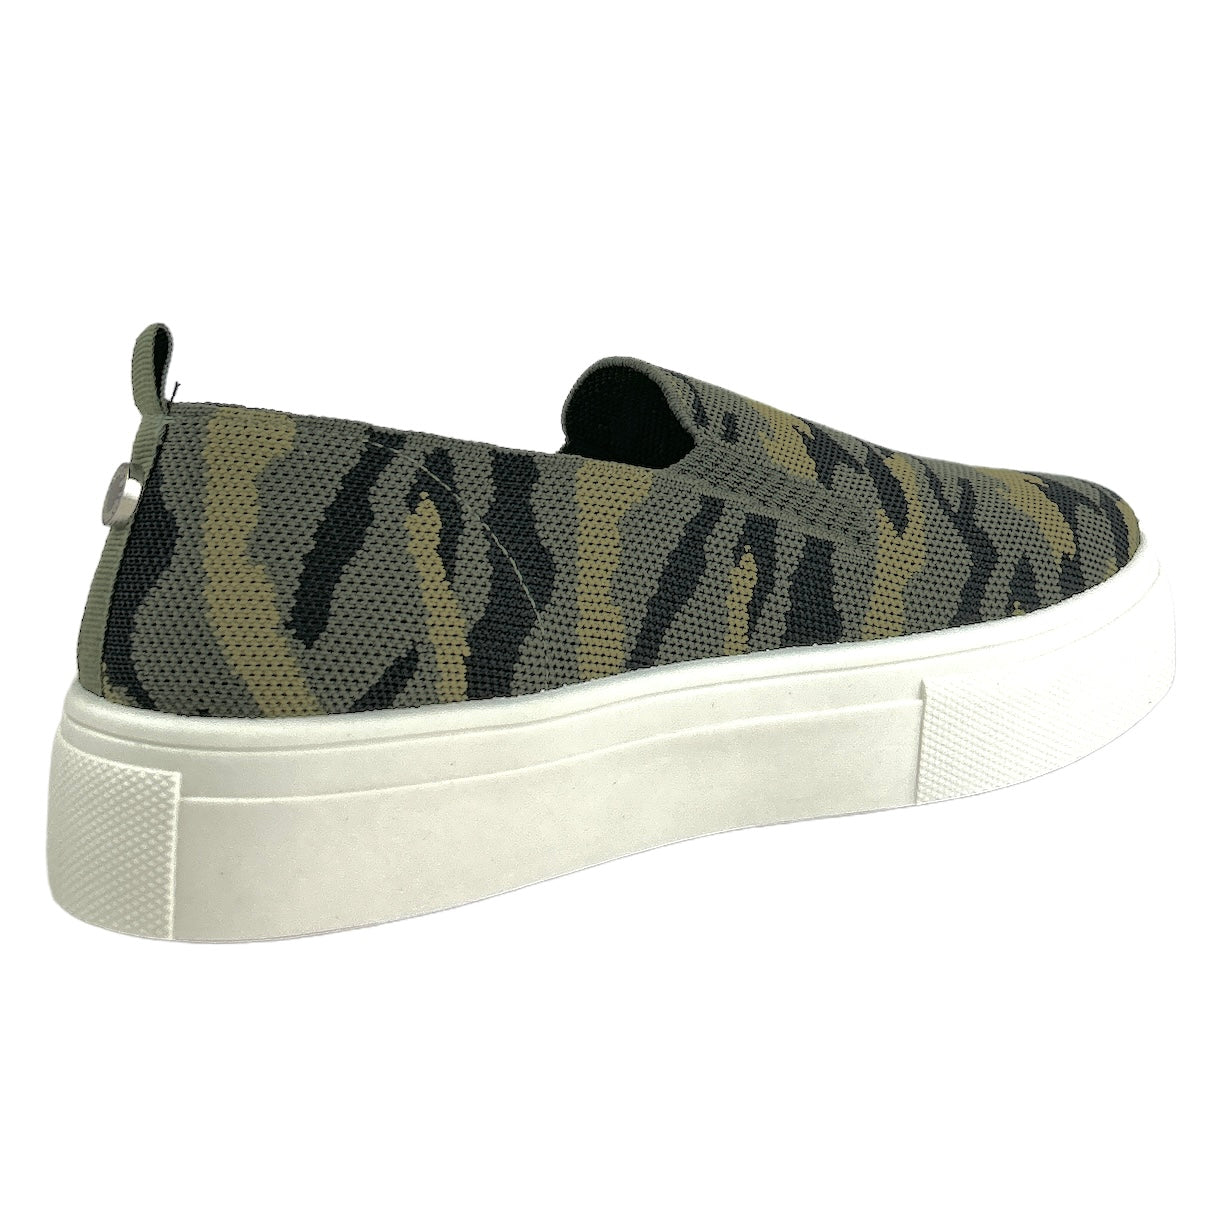 MAYGEE Camouflage Platform Slip On Women's Sneakers